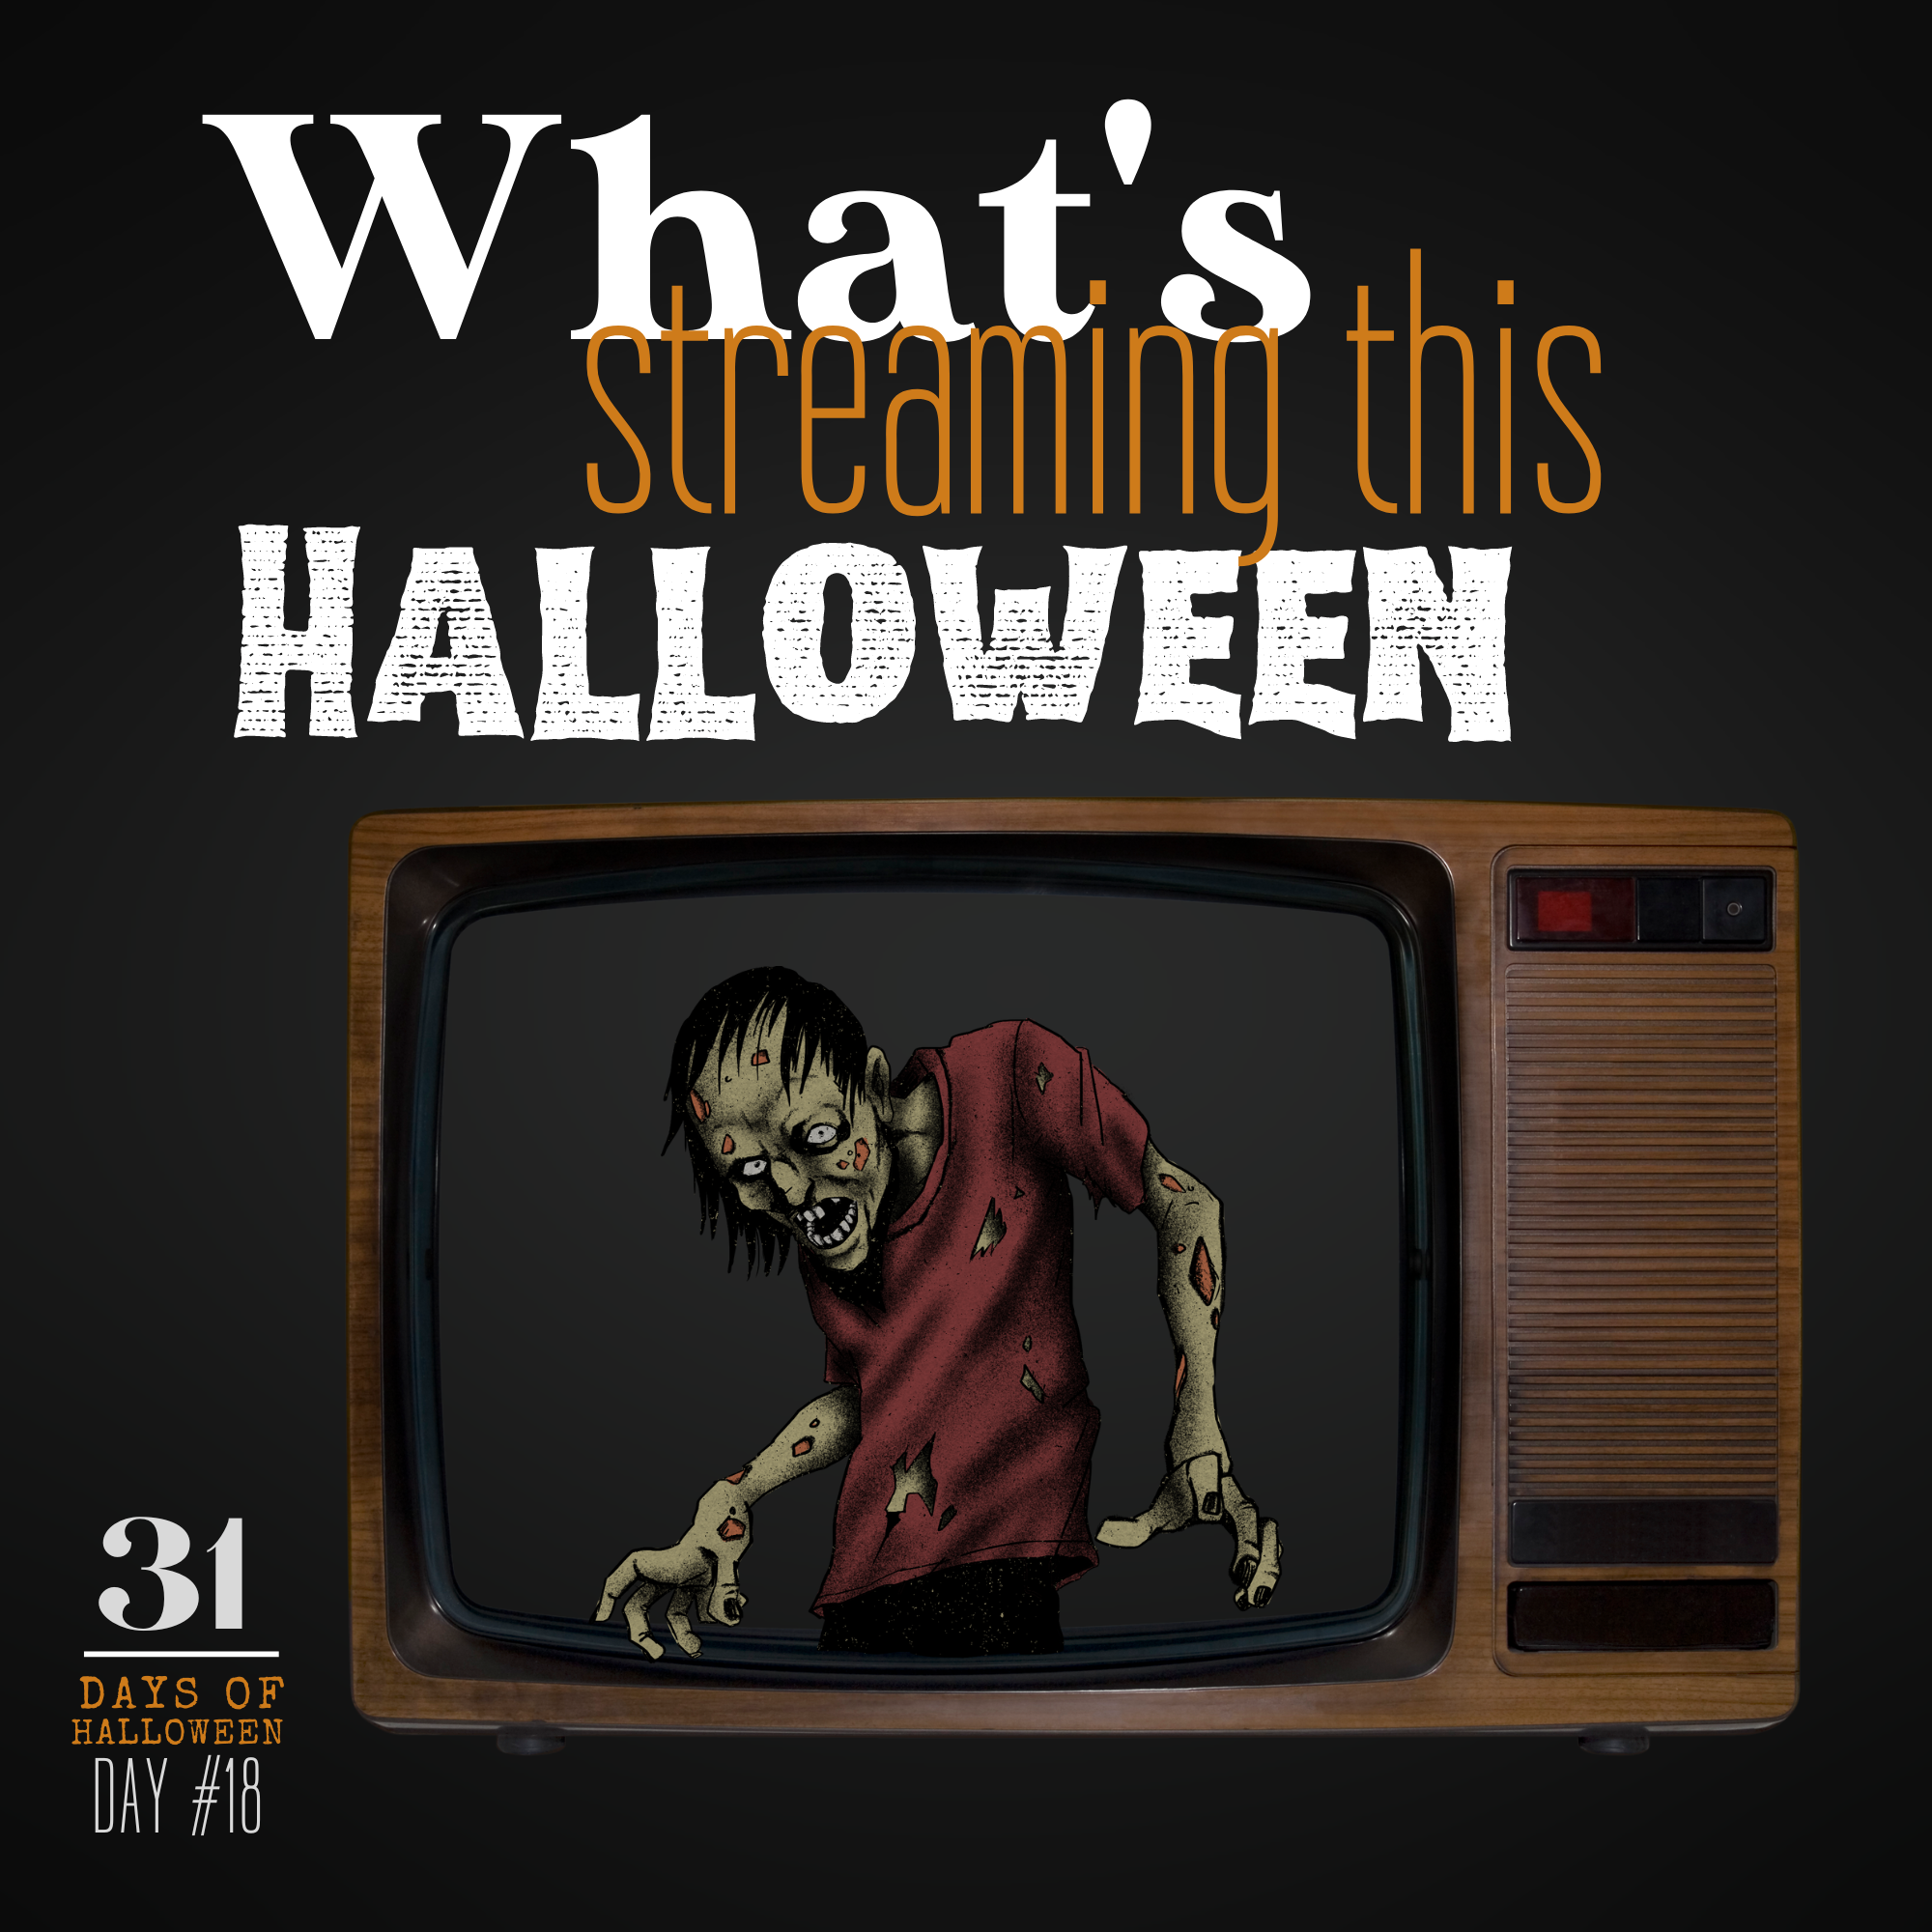 31 Days of Halloween: Day #18 …The Best Surprises Streaming This Halloween